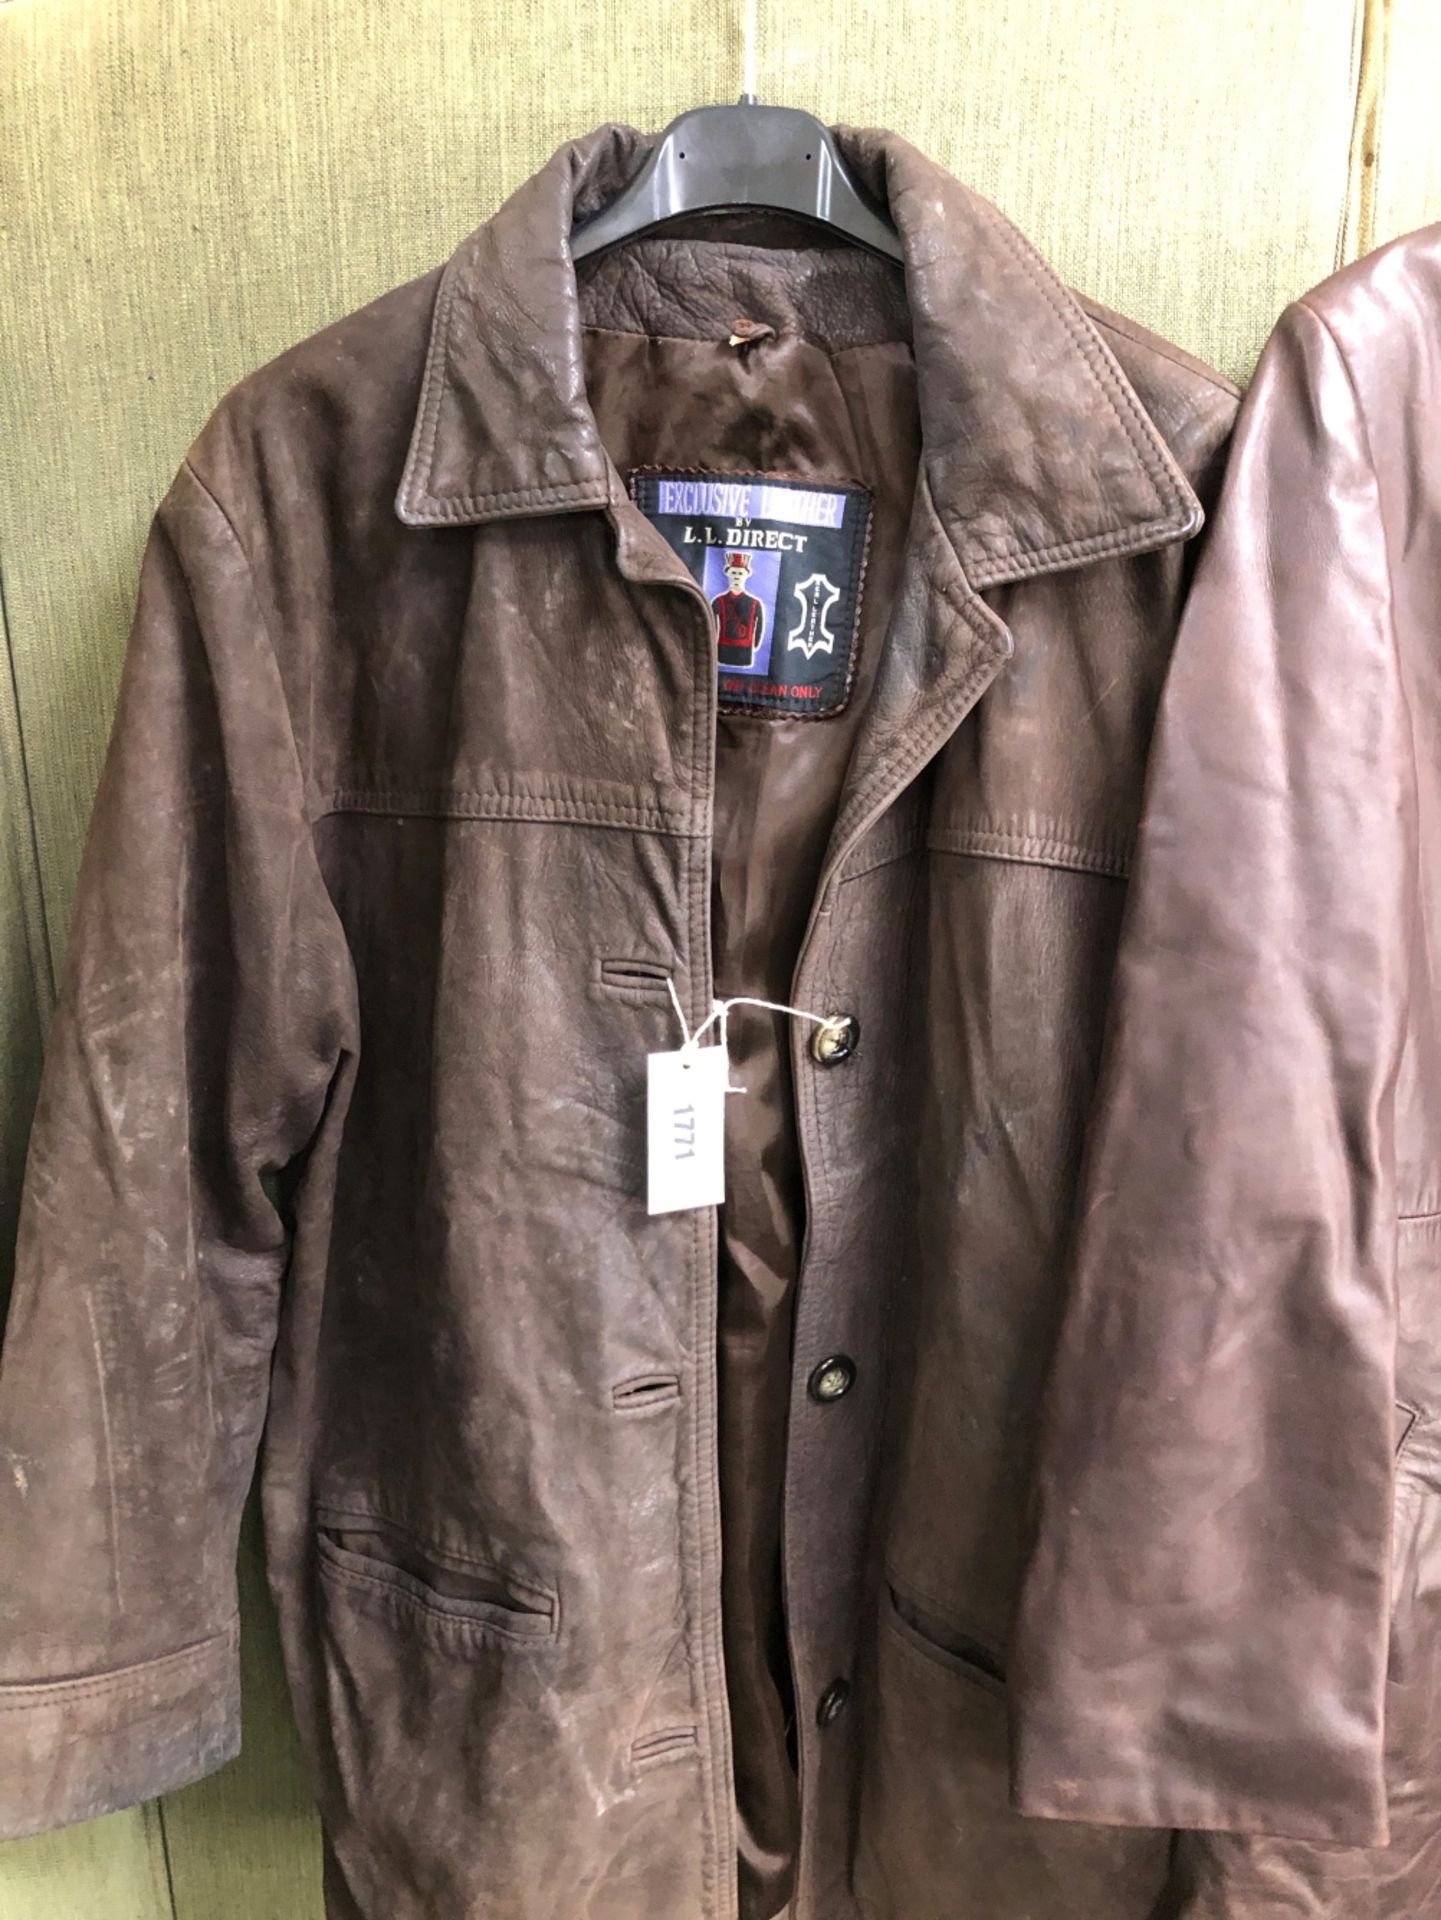 JACKET. A BROWN LEATHER JACKET, EXCLUSIVE LEATHER BY L.L DIRECT, SIZE STATED 12, PIT TO PIT 51cms, - Image 4 of 8